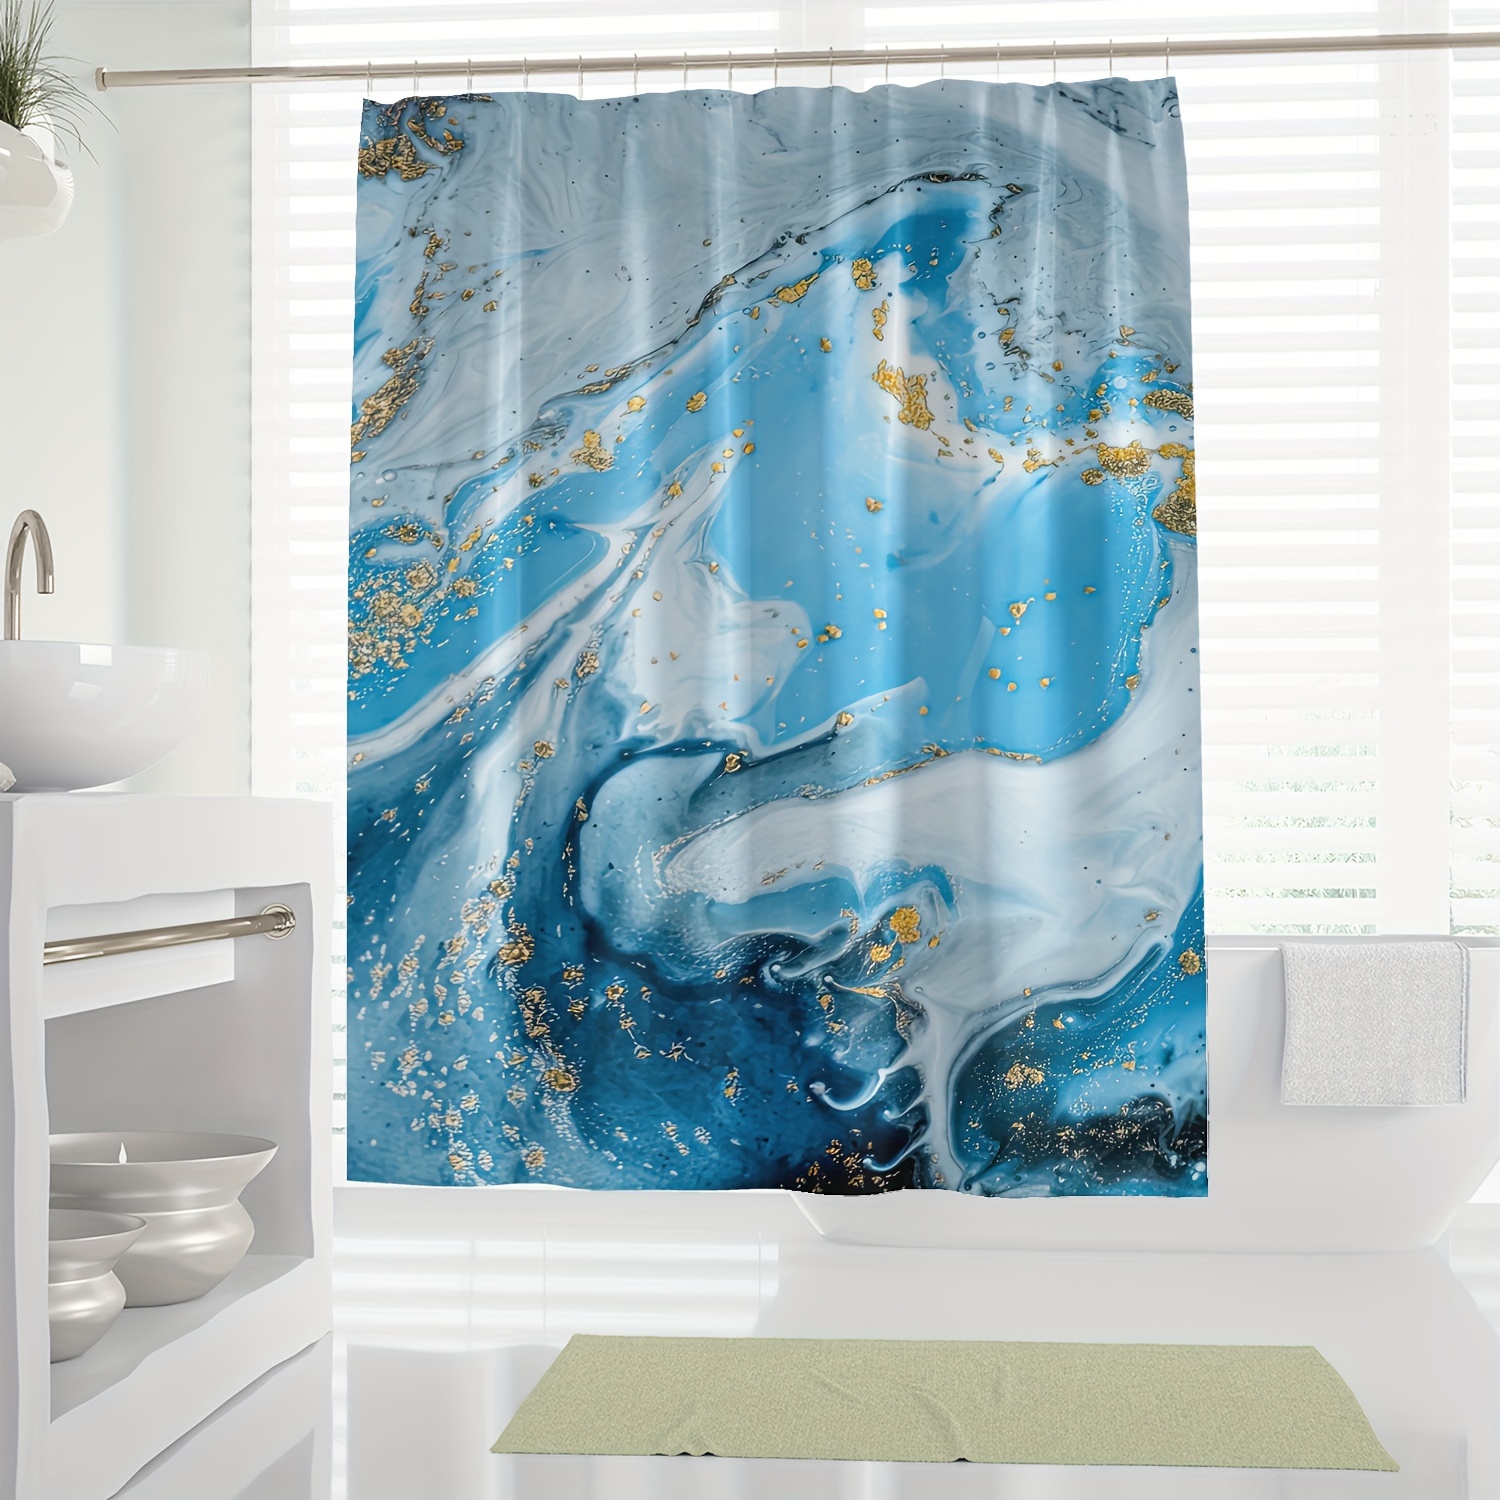 

1pc Blue Marble Pattern Shower Curtain With Hooks, Waterproof Bath Partition Curtain, Decorative Bathroom Accessories For Home